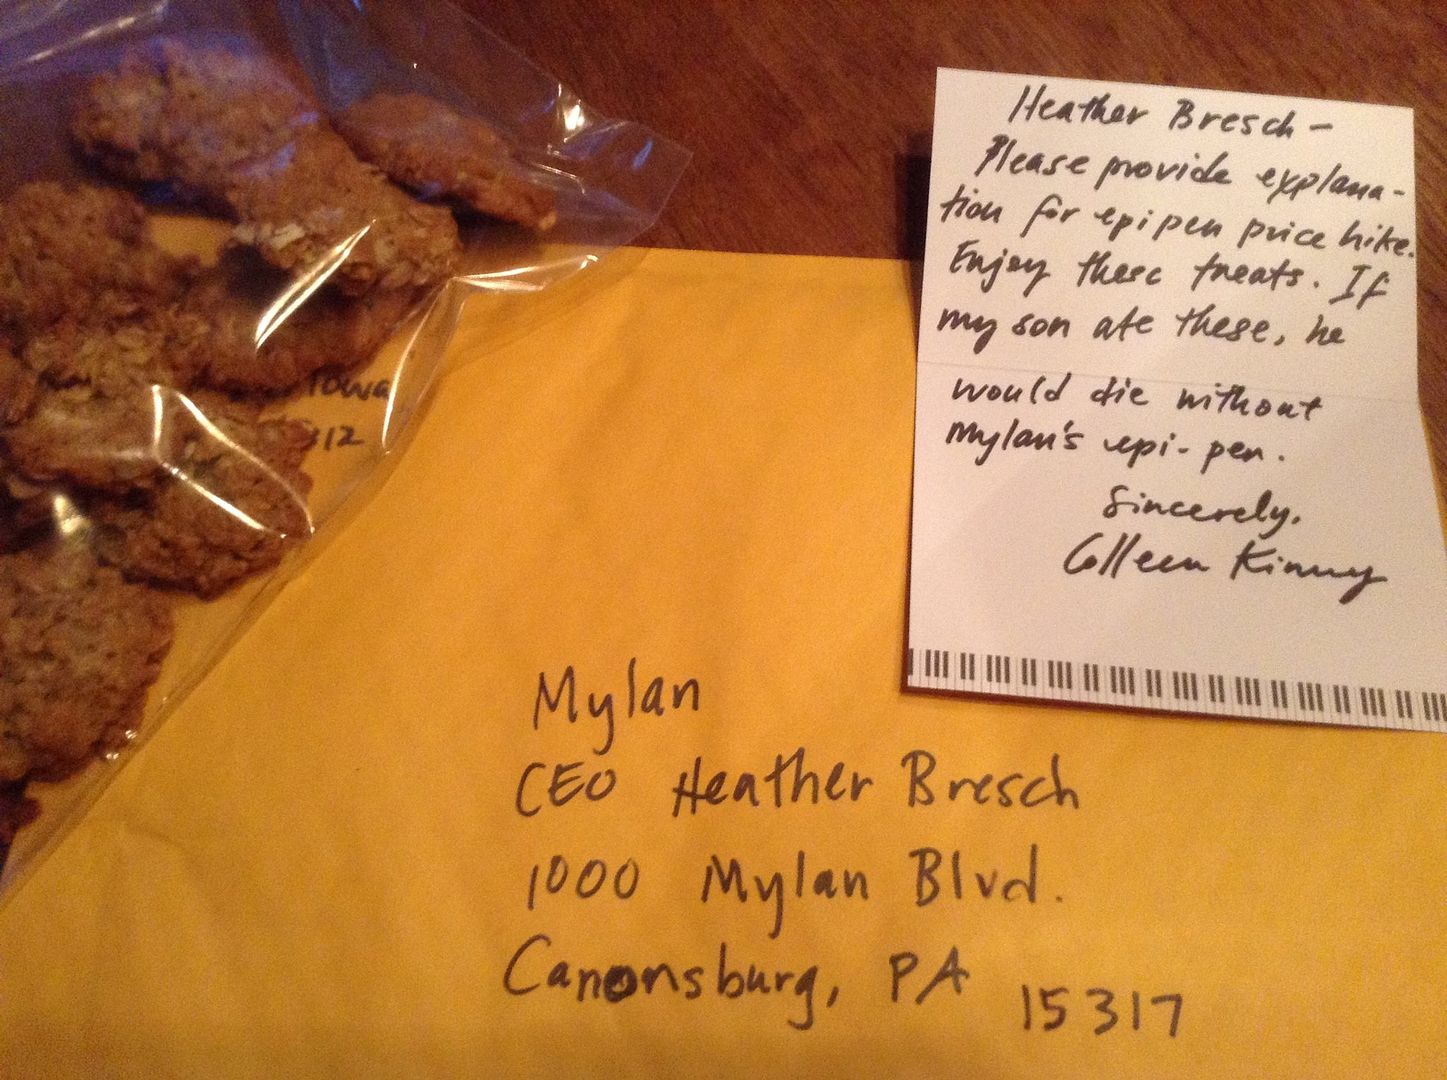 care package for Mylan CEO photo 14139321_1087228708034219_1933056341_o_zpsyfhs2oqi.jpg